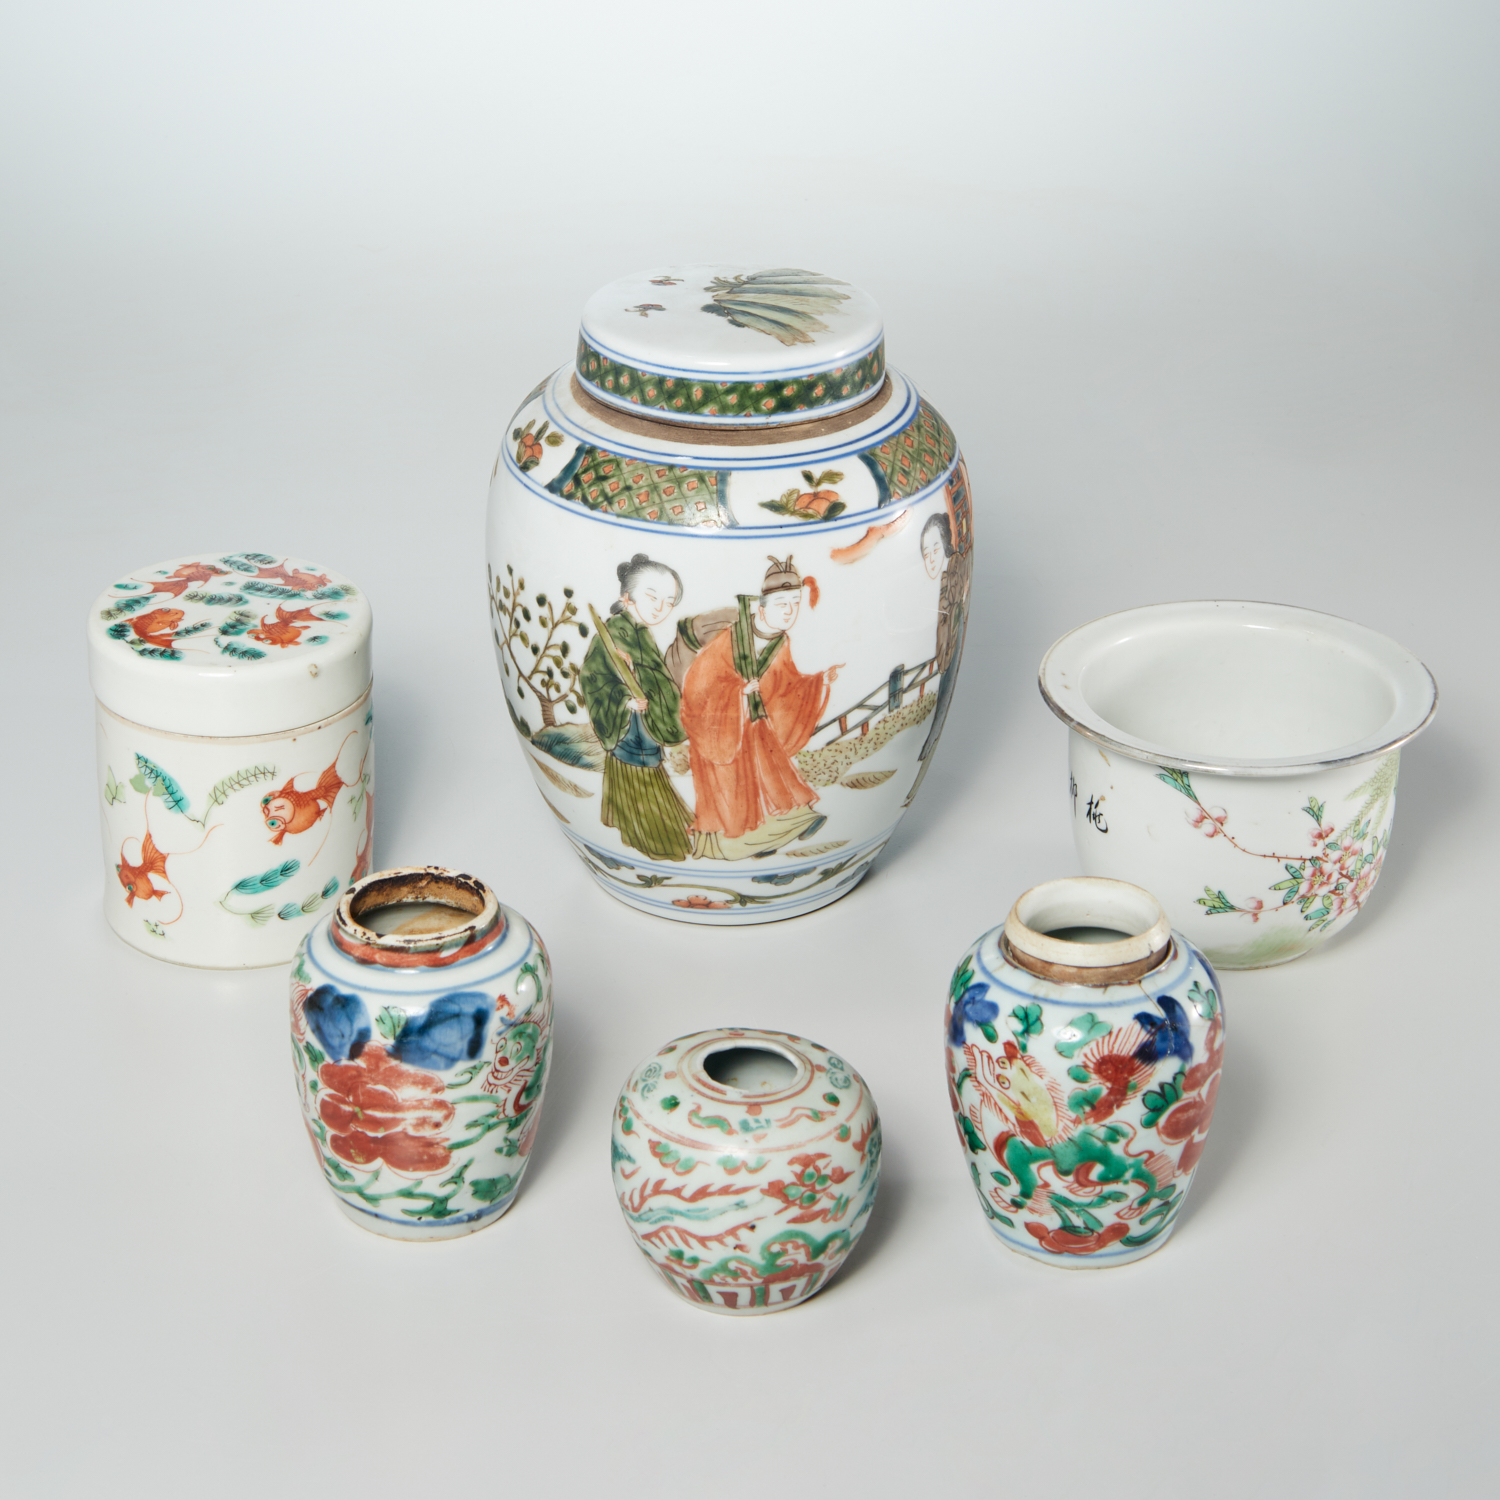 COLLECTION CHINESE ENAMELED PORCELAINS 3c27ad